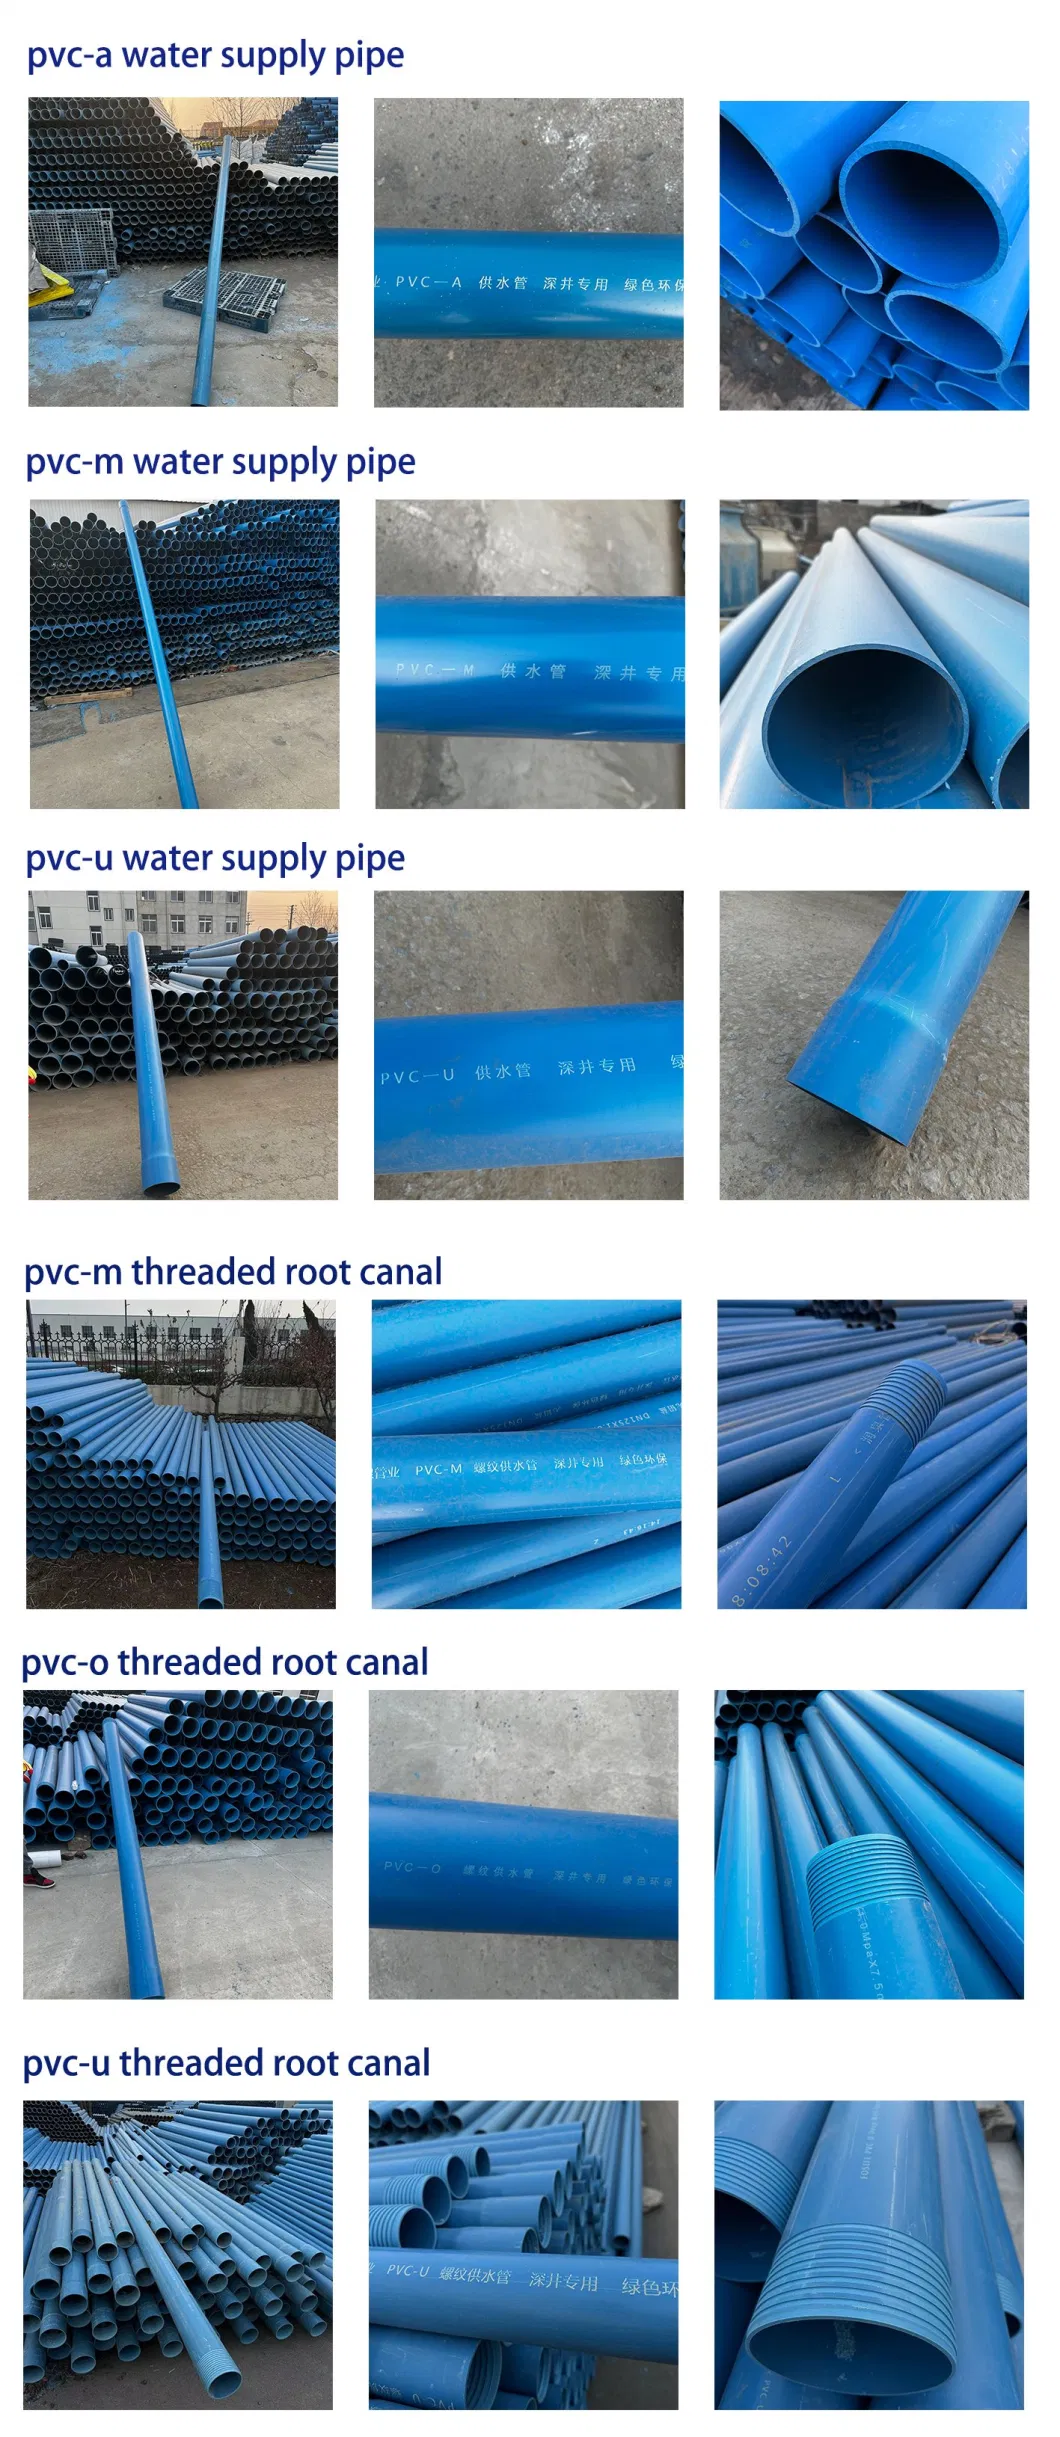 60 Diameter 6.0 Thickness Water Well UPVC Pipe Blue PVC Water Well Casing Tube with Thread Connection Made in China